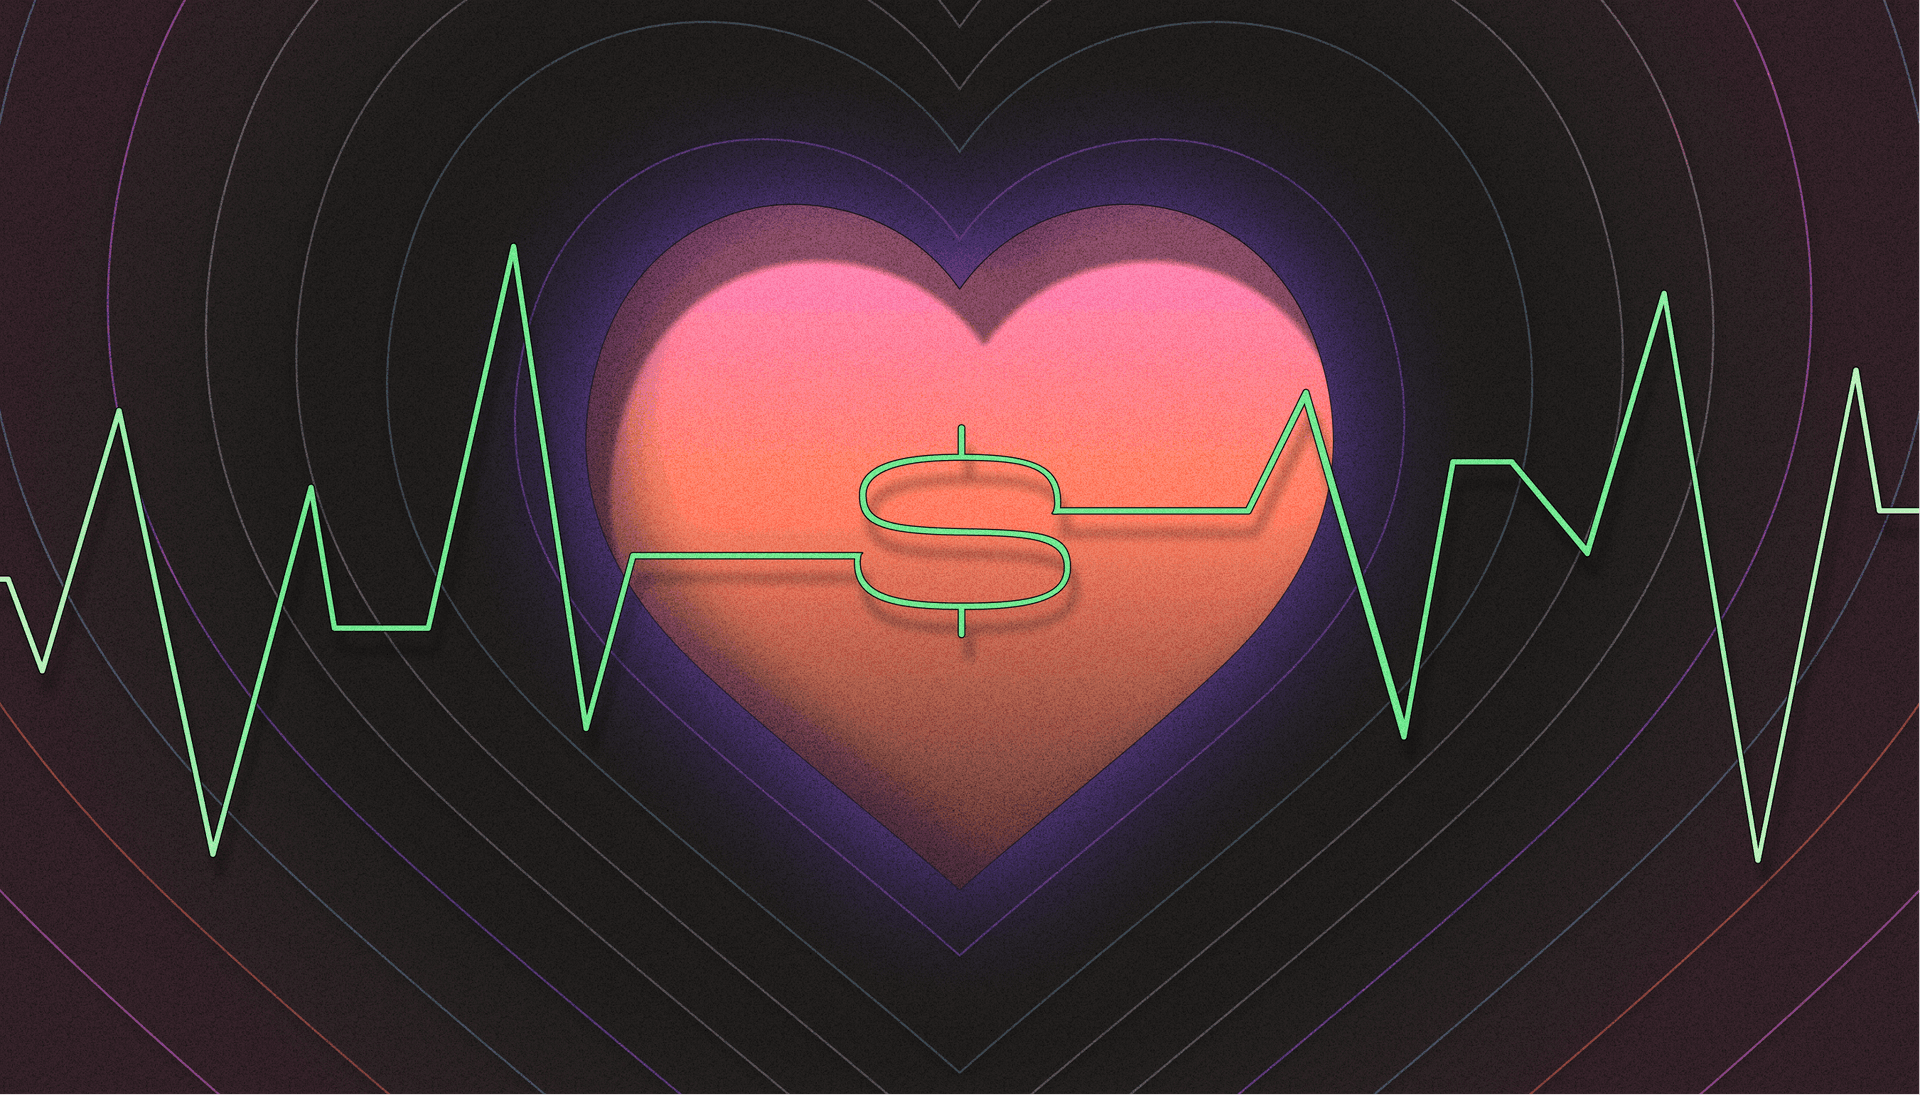 Illustration of a heart beat chart with a dollar sign